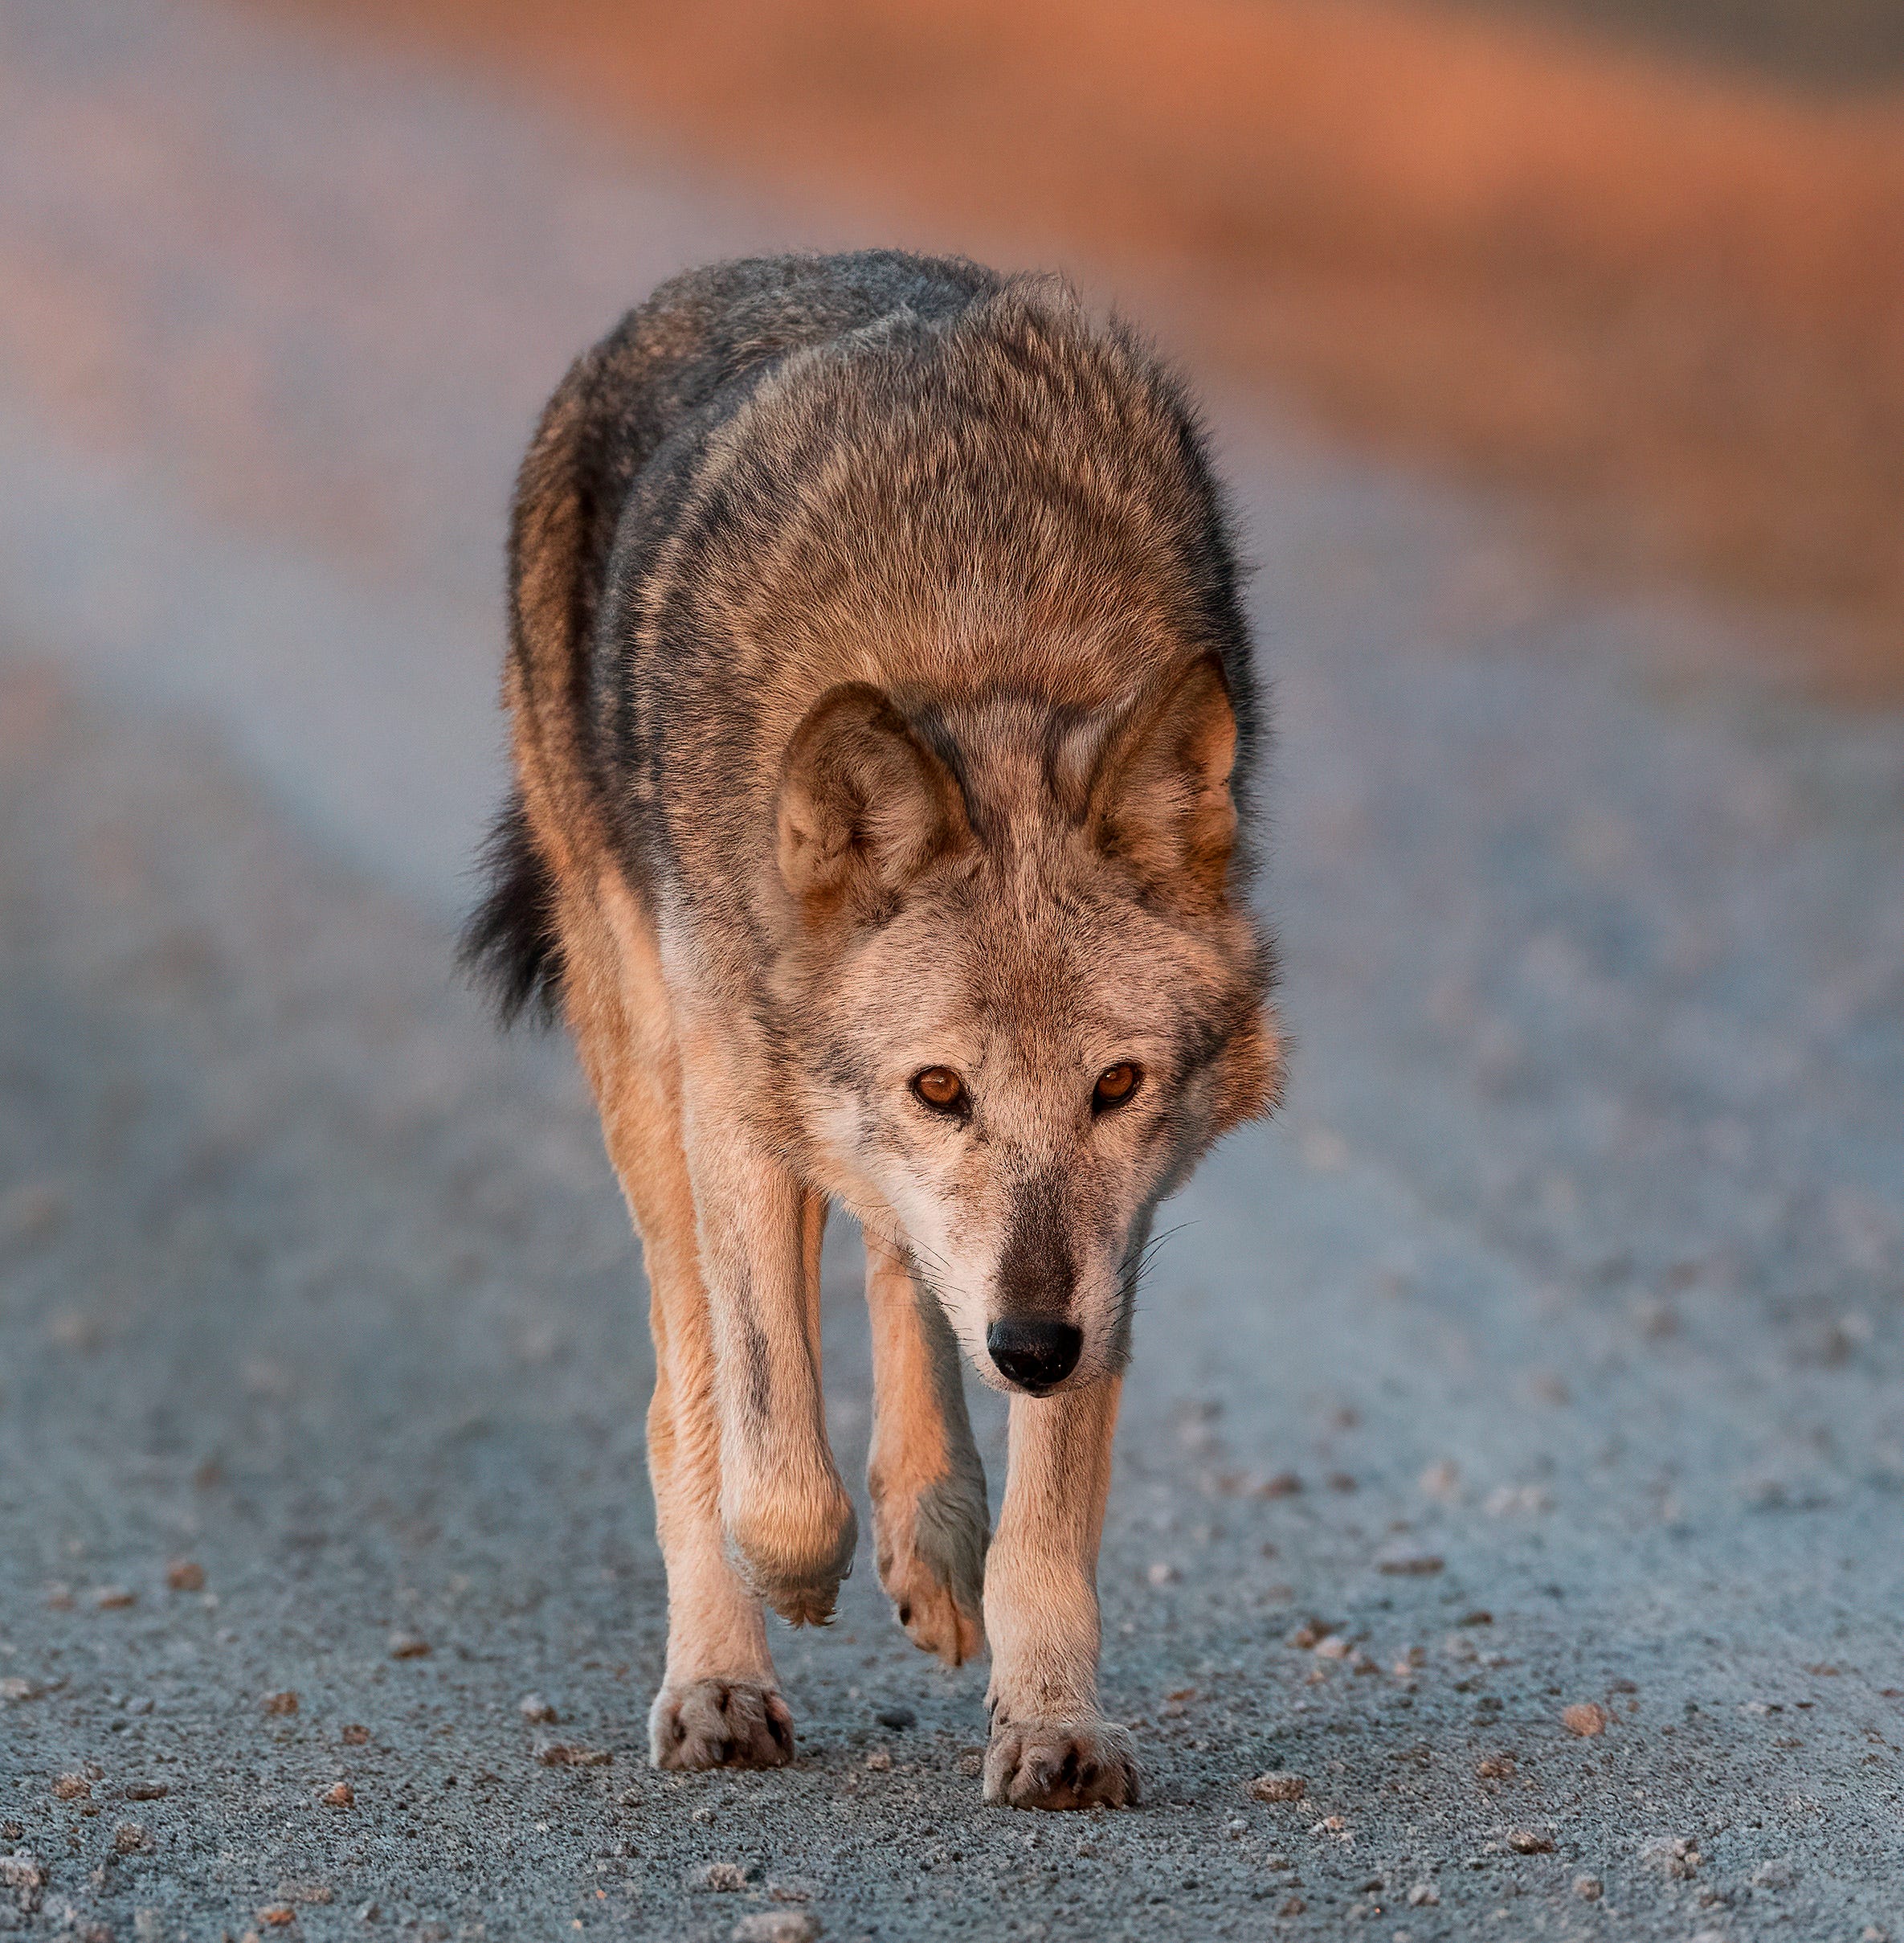 Why did the red wolf become an endangered species?